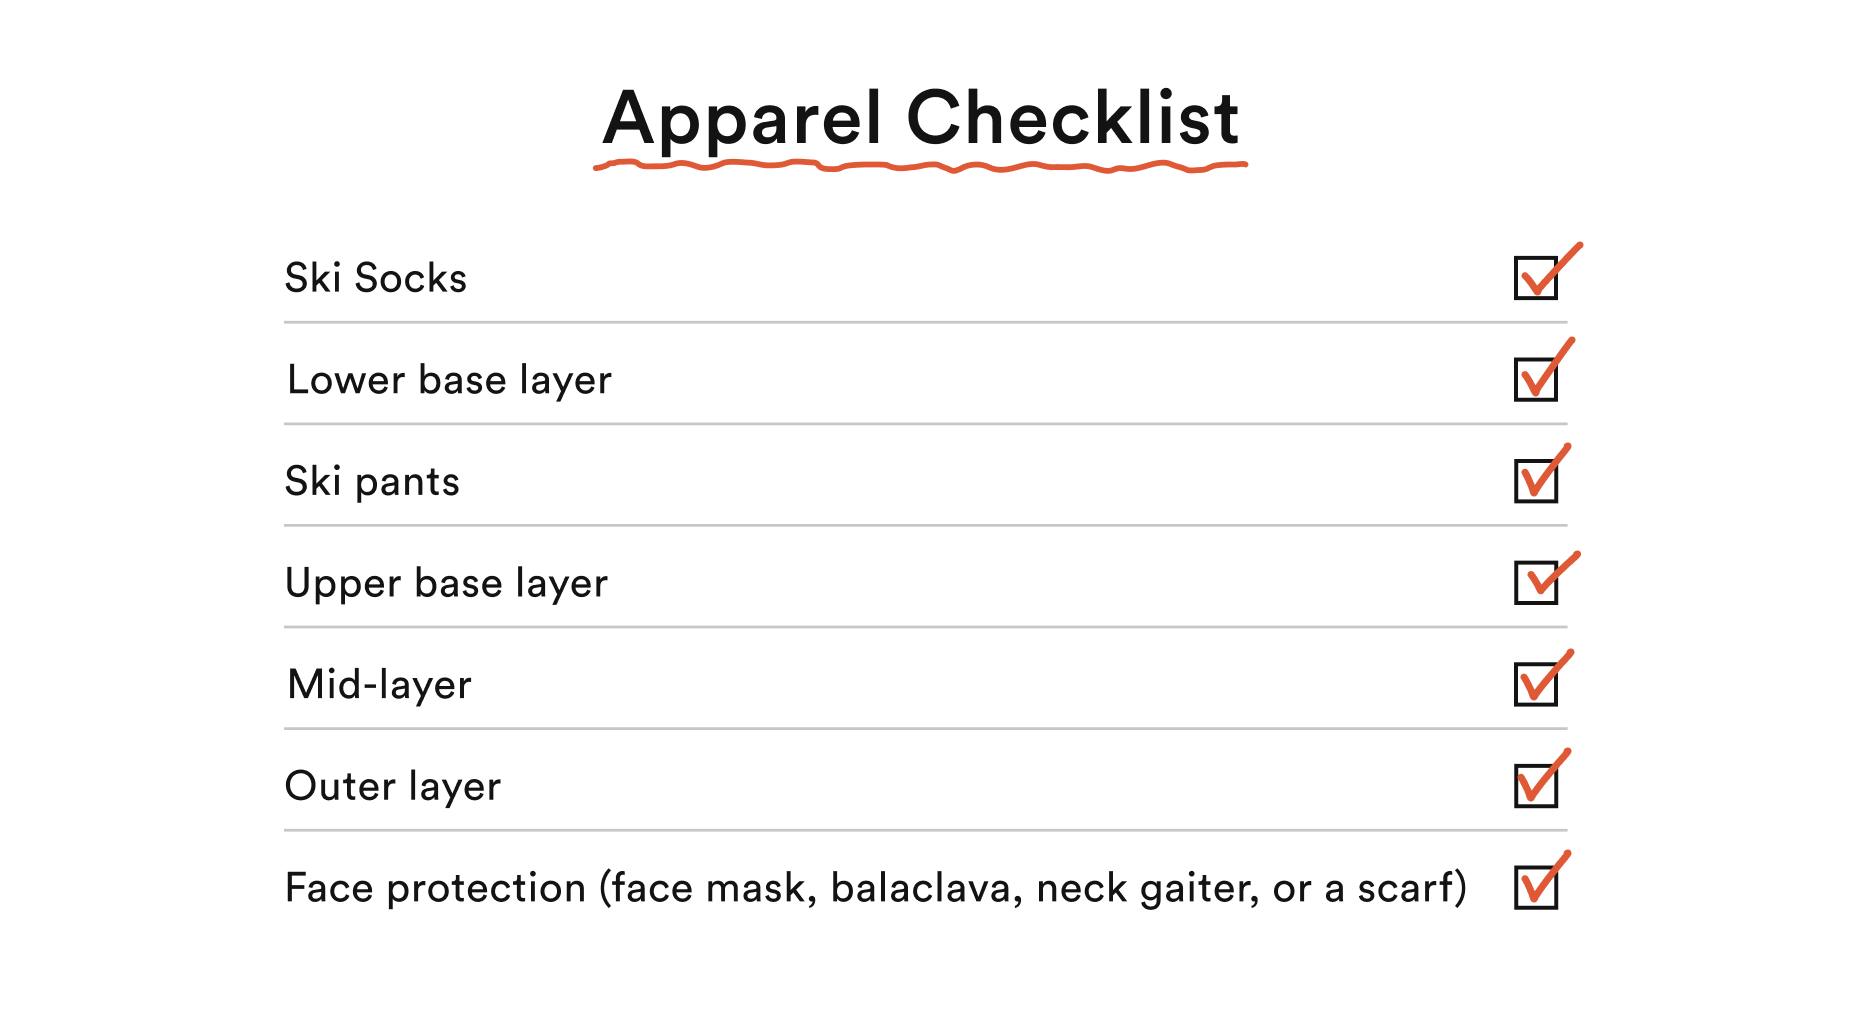 A graphic of an apparel checklist. The items checked are: ski socks, lower base layer, ski pants, upper base layer, mid-layer, outer layer, and face protection (face mask, balaclava, neck gaiter, or scarf).